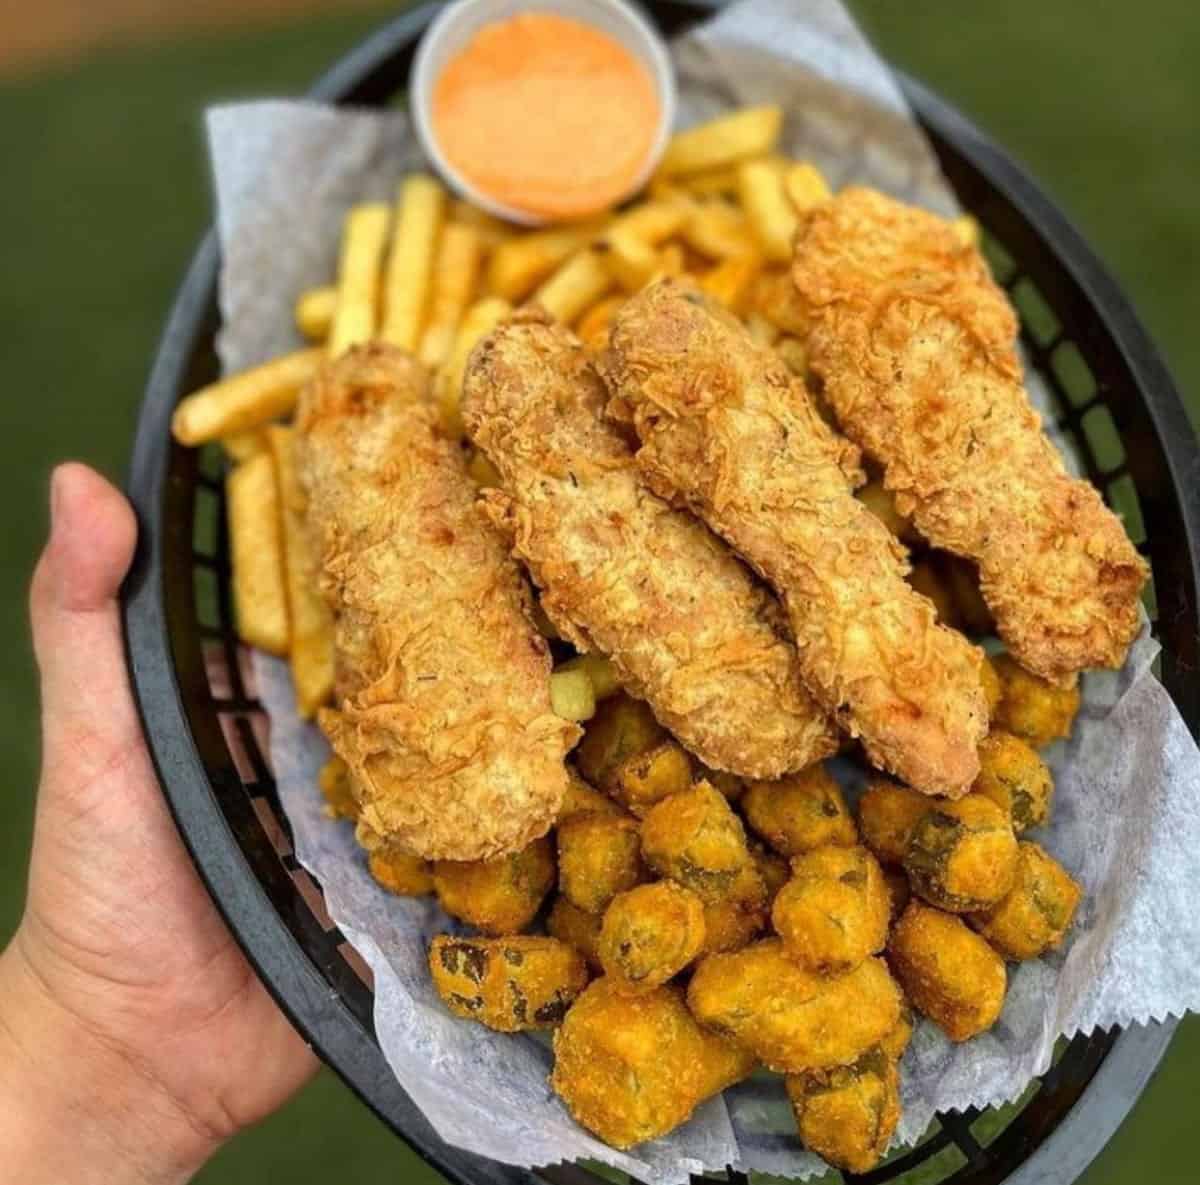 A plate of vegan fried chicken, fried okra, and fries.